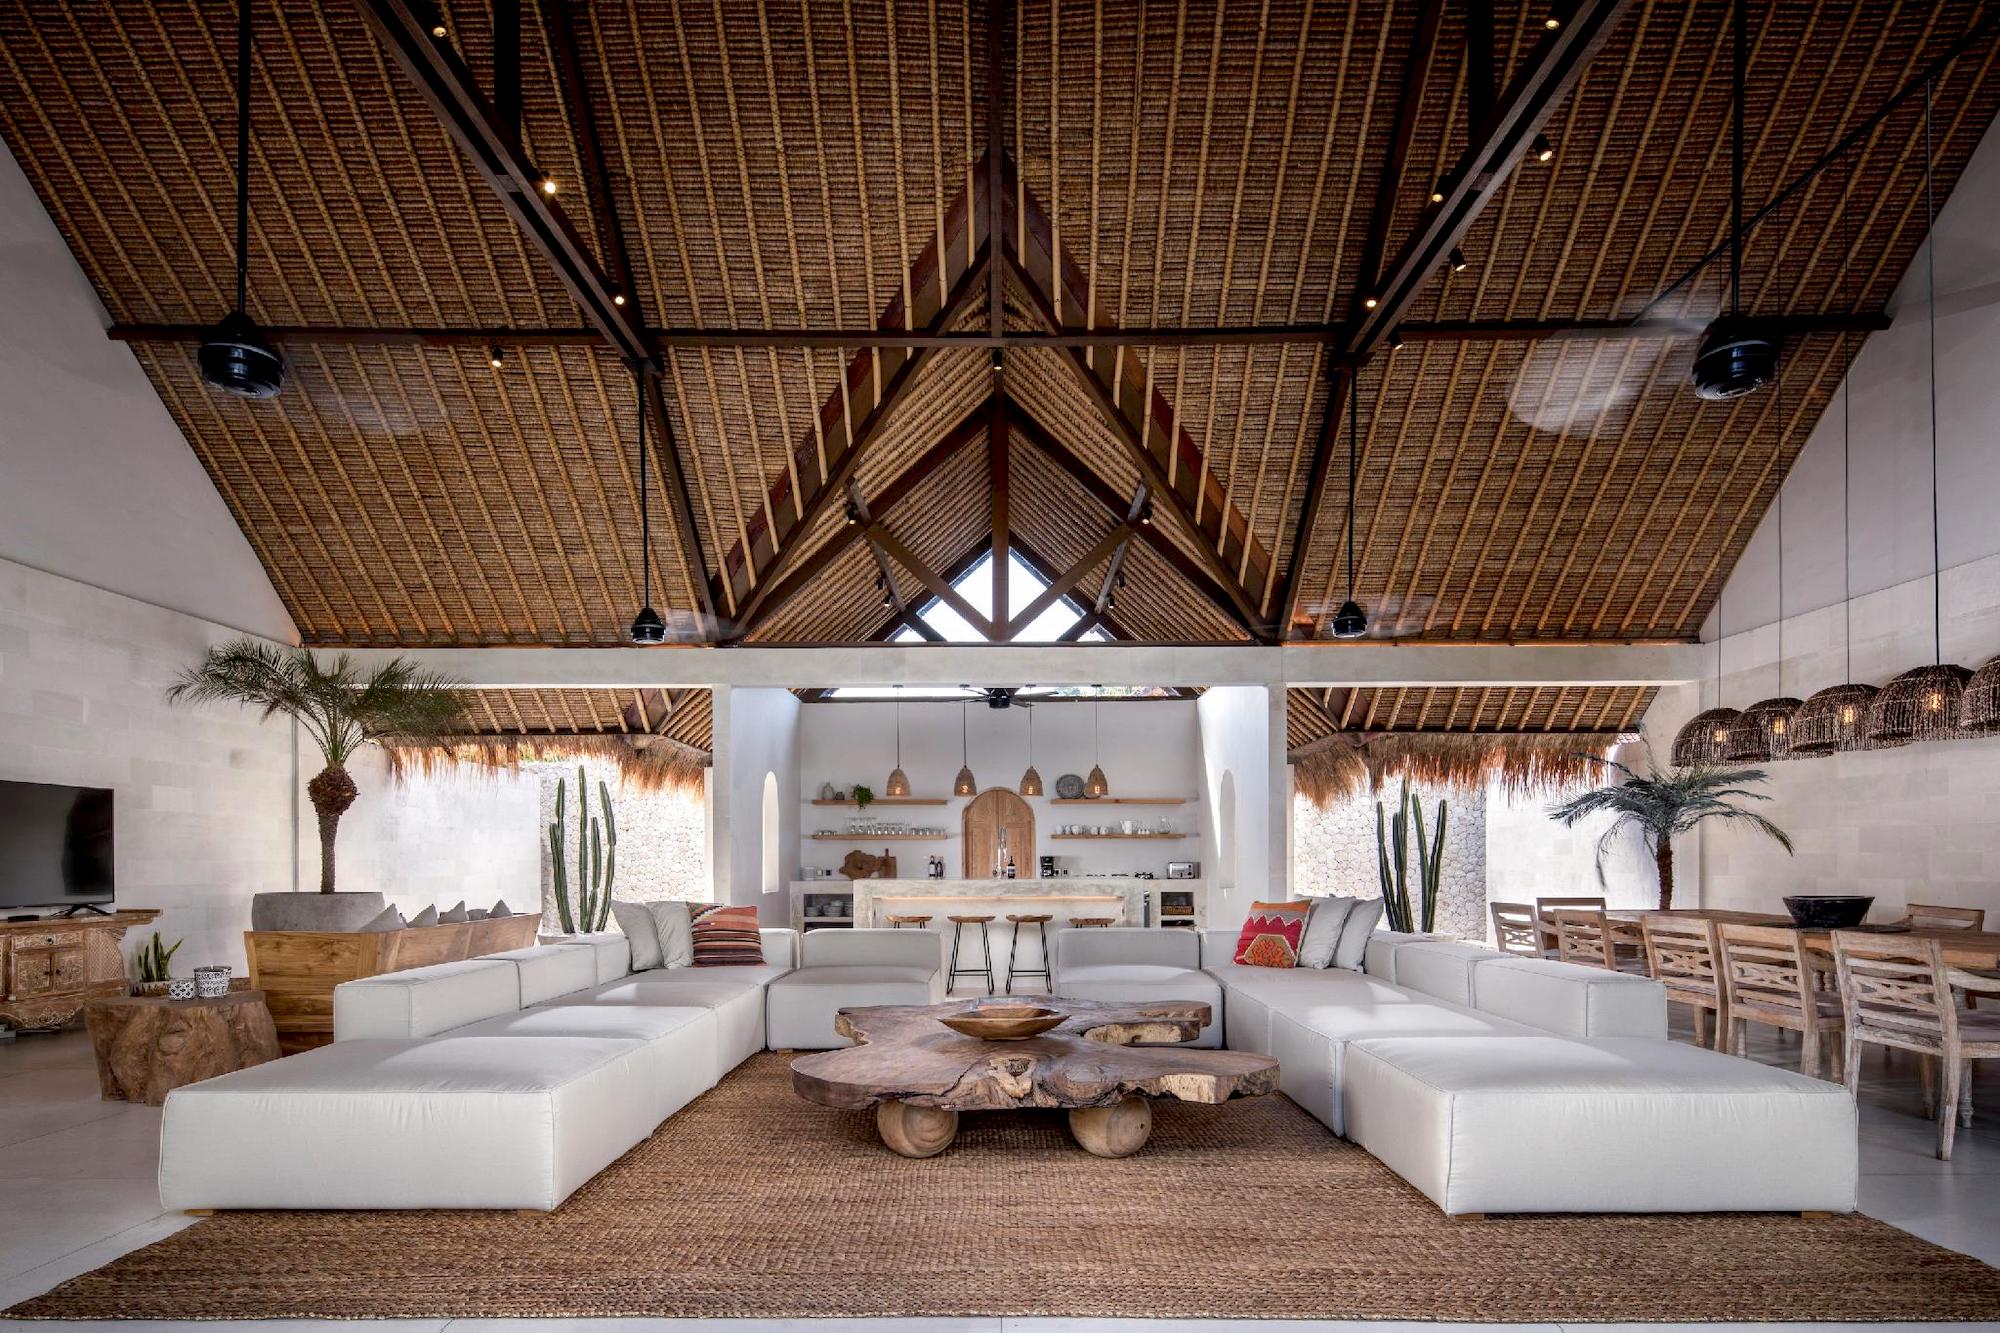 Paradise at Home – Tropical Décor Inspiration from our Bali Villas